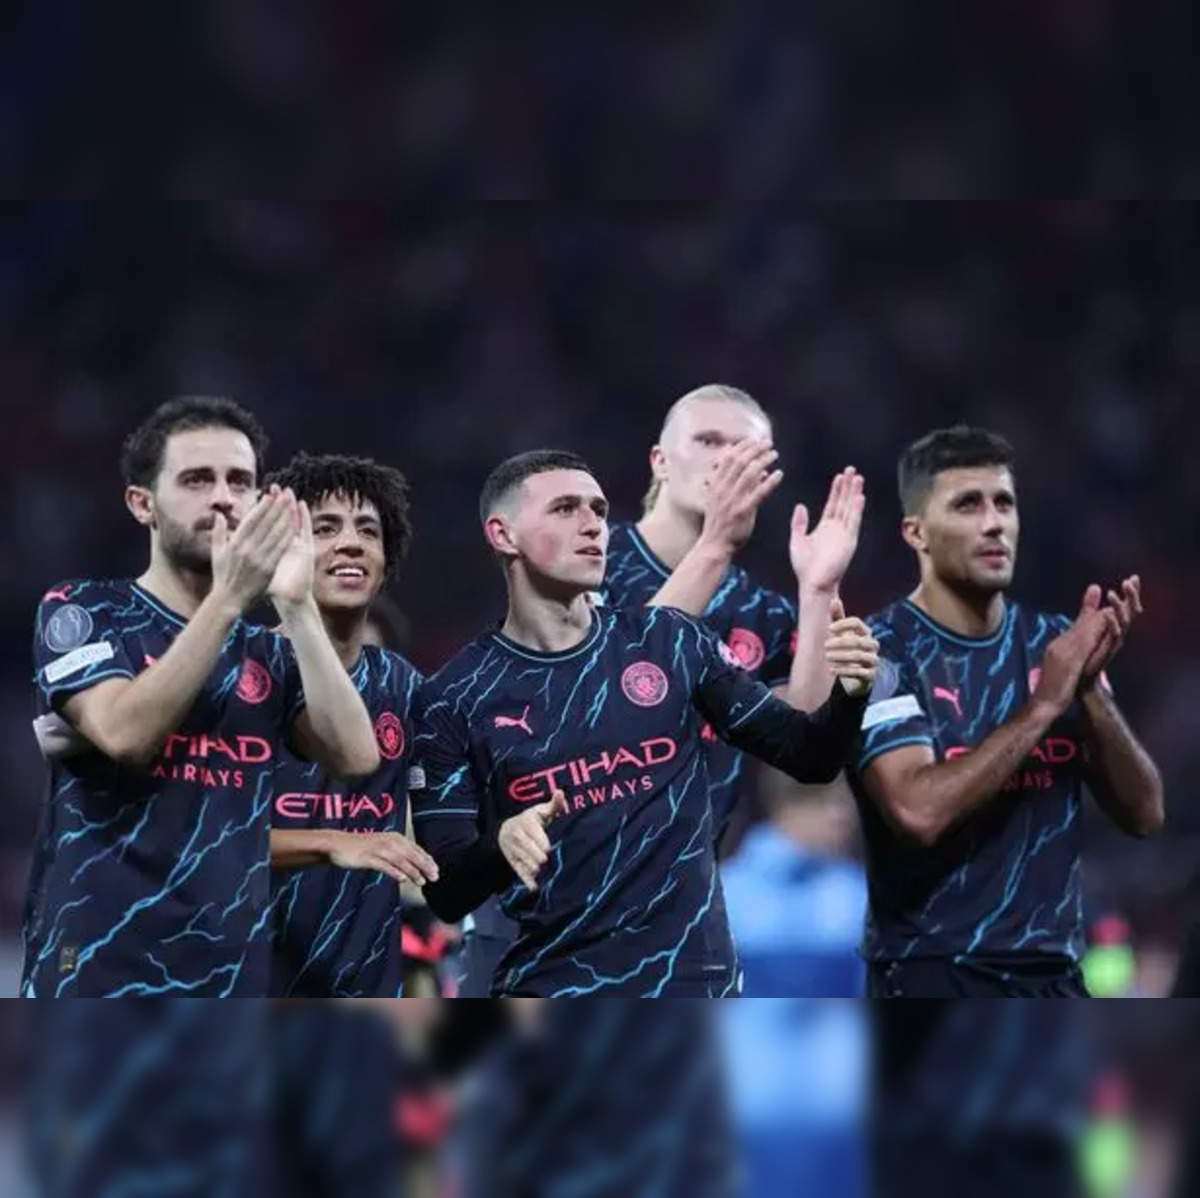 Young Boys UEFA Champions League Manchester City vs Young Boys live streaming Kick off time, where to watch UEFA Champions League match